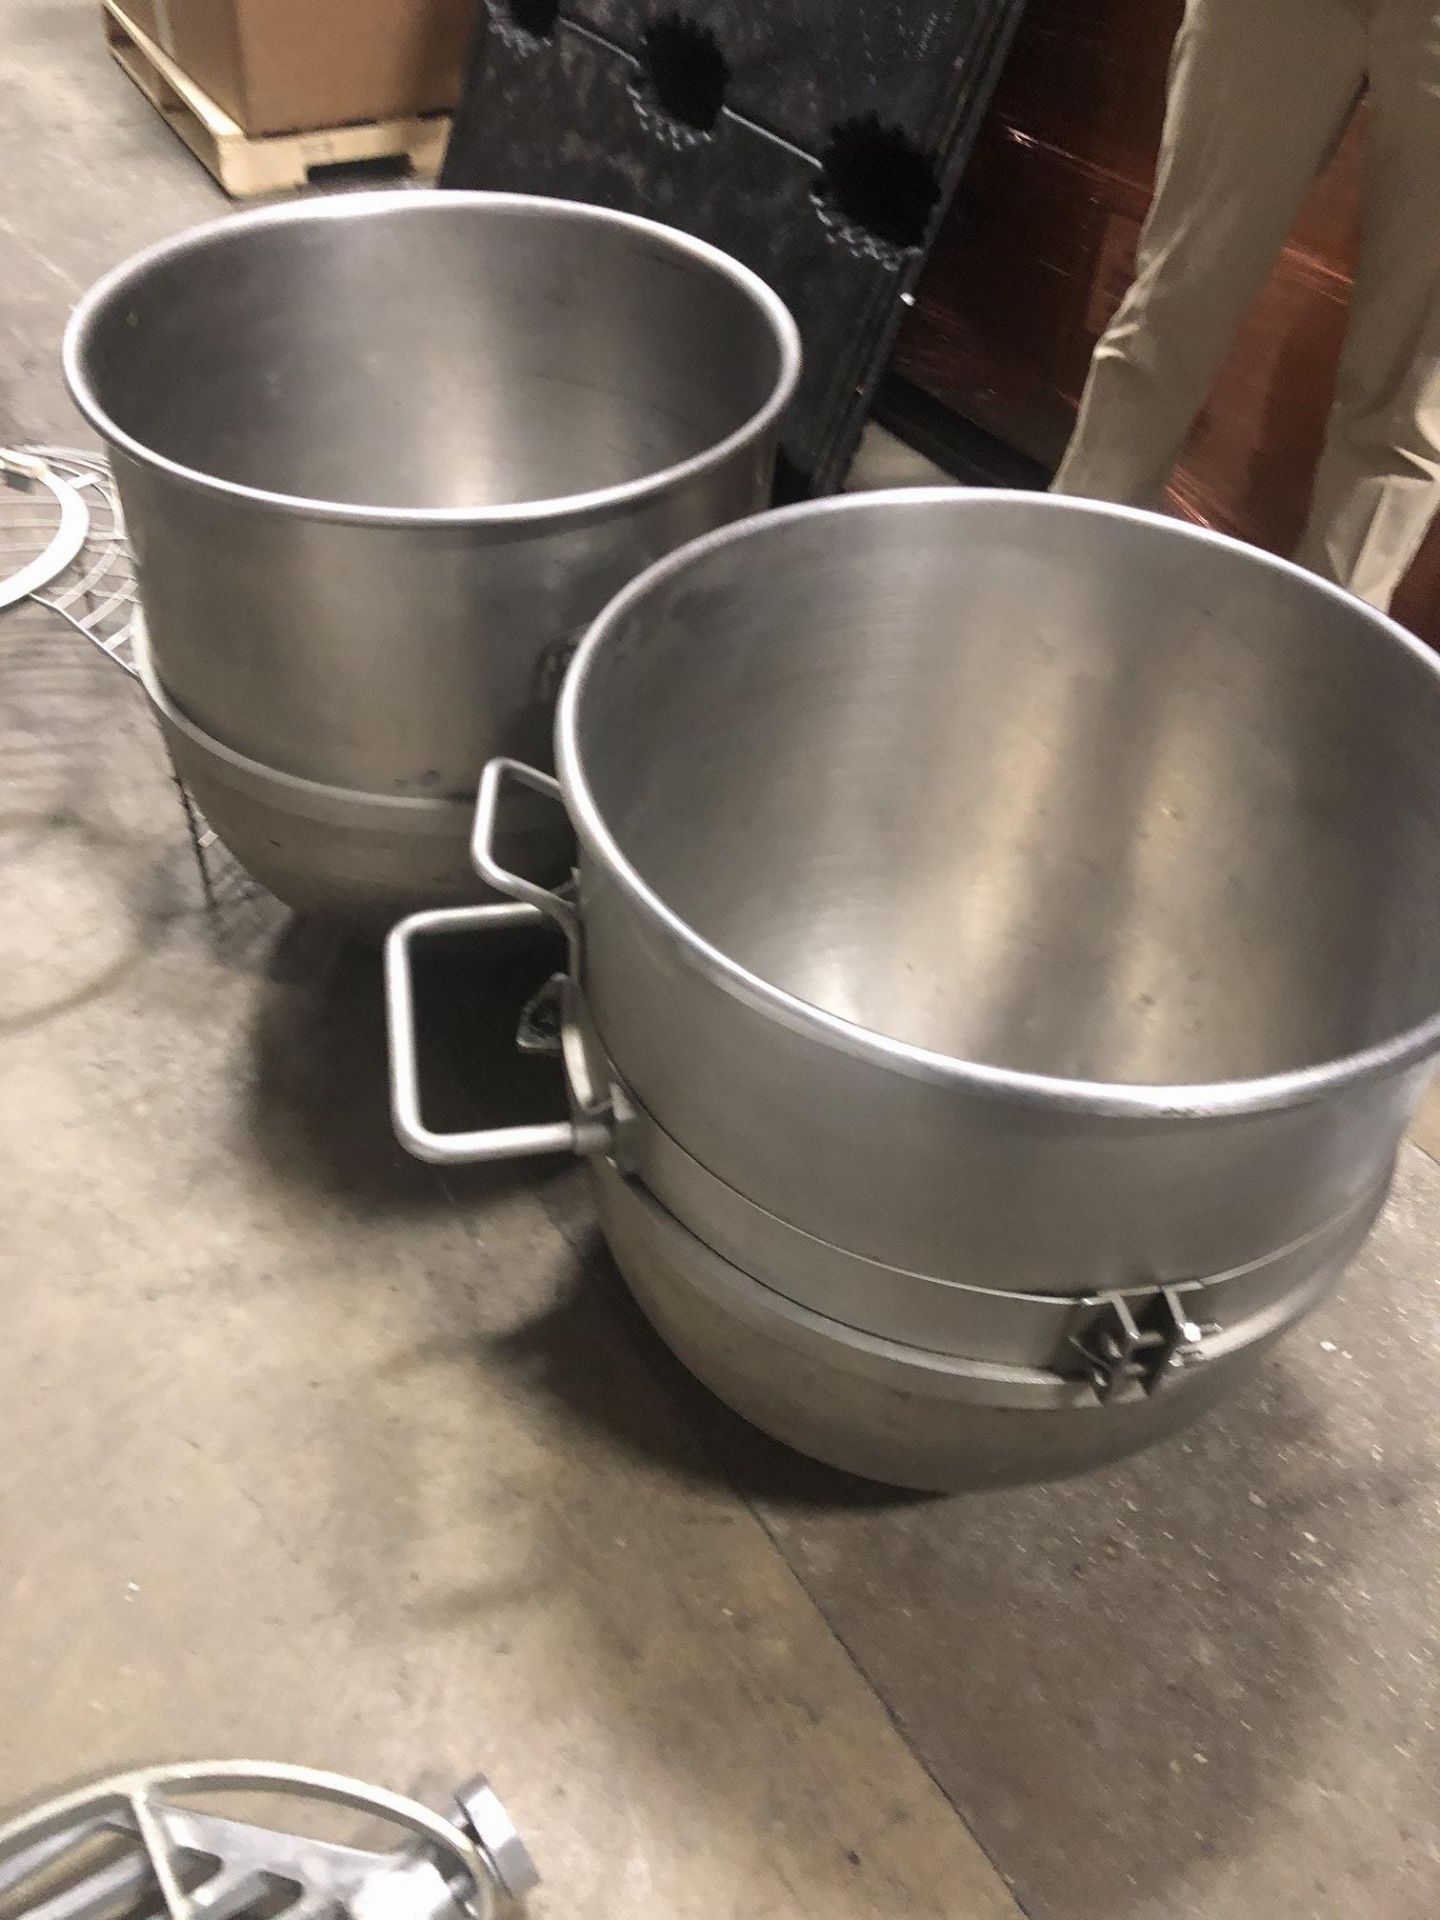 (2) Hobart Bowls 22.5" diameter x 26" deep (approx. 80 qt bowls) Loading is free. Skidding or - Image 5 of 5